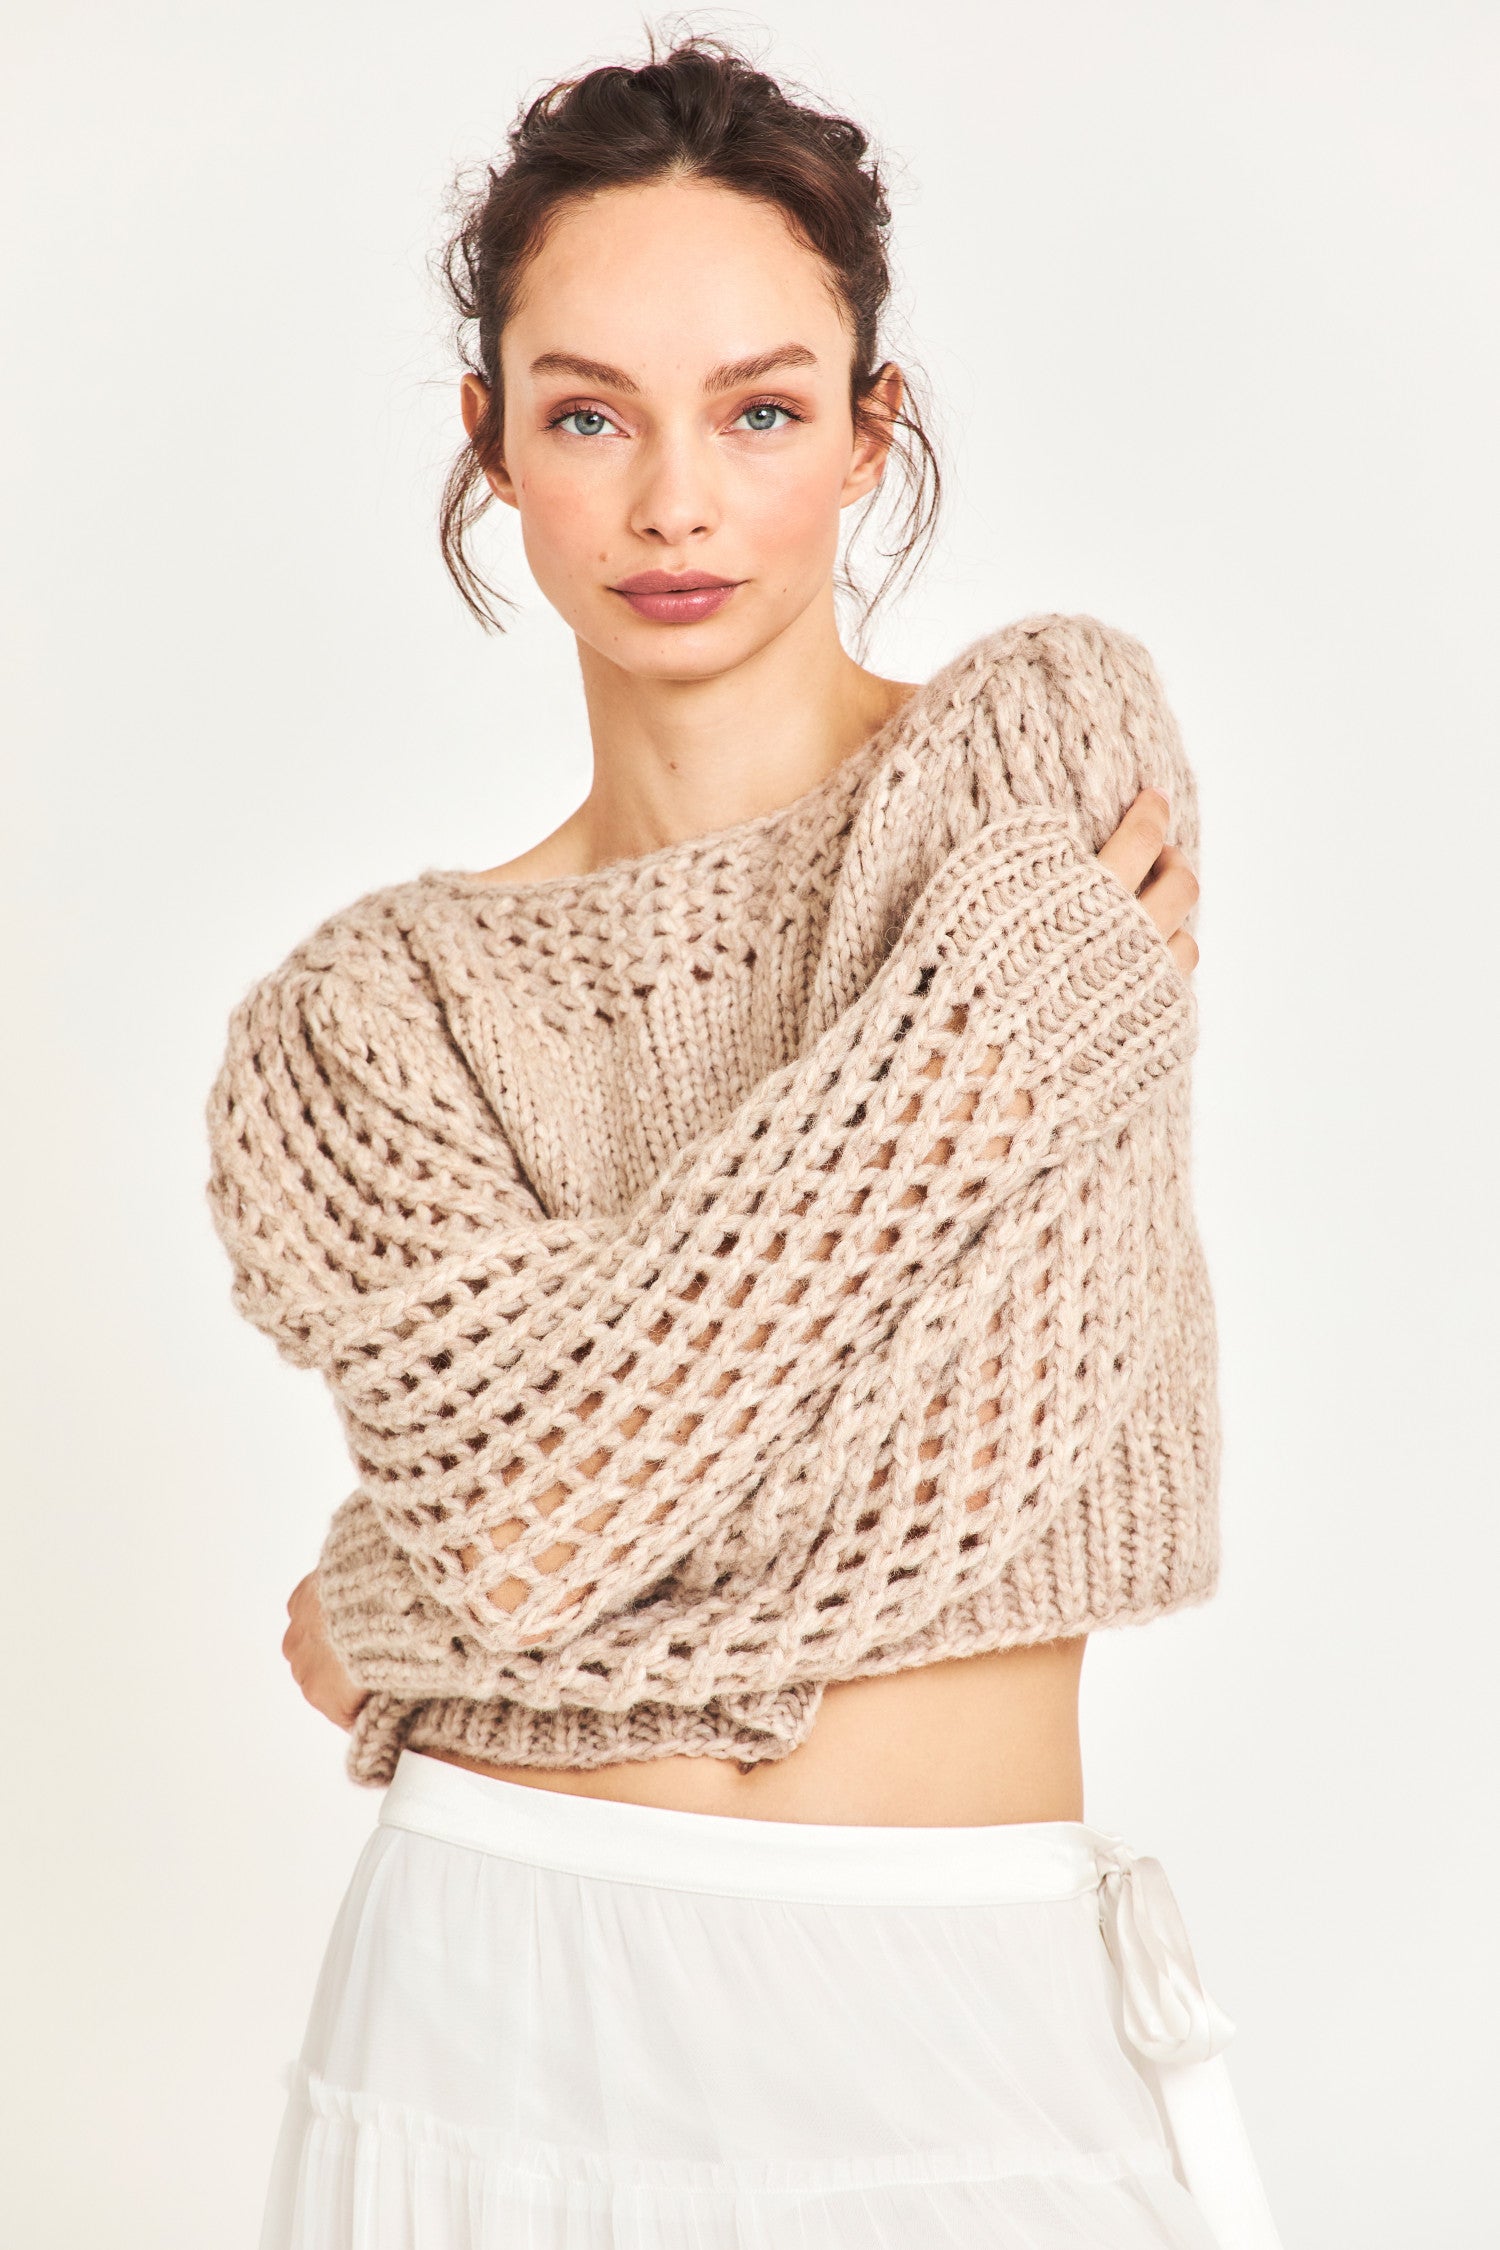 The Larson crop pullover in a soft brown is hand knitted from a Peruvian alpaca blend that features a silky feel and pointelle sleeves detailing underneath the boat neckline. It is slightly cropped a the hem 